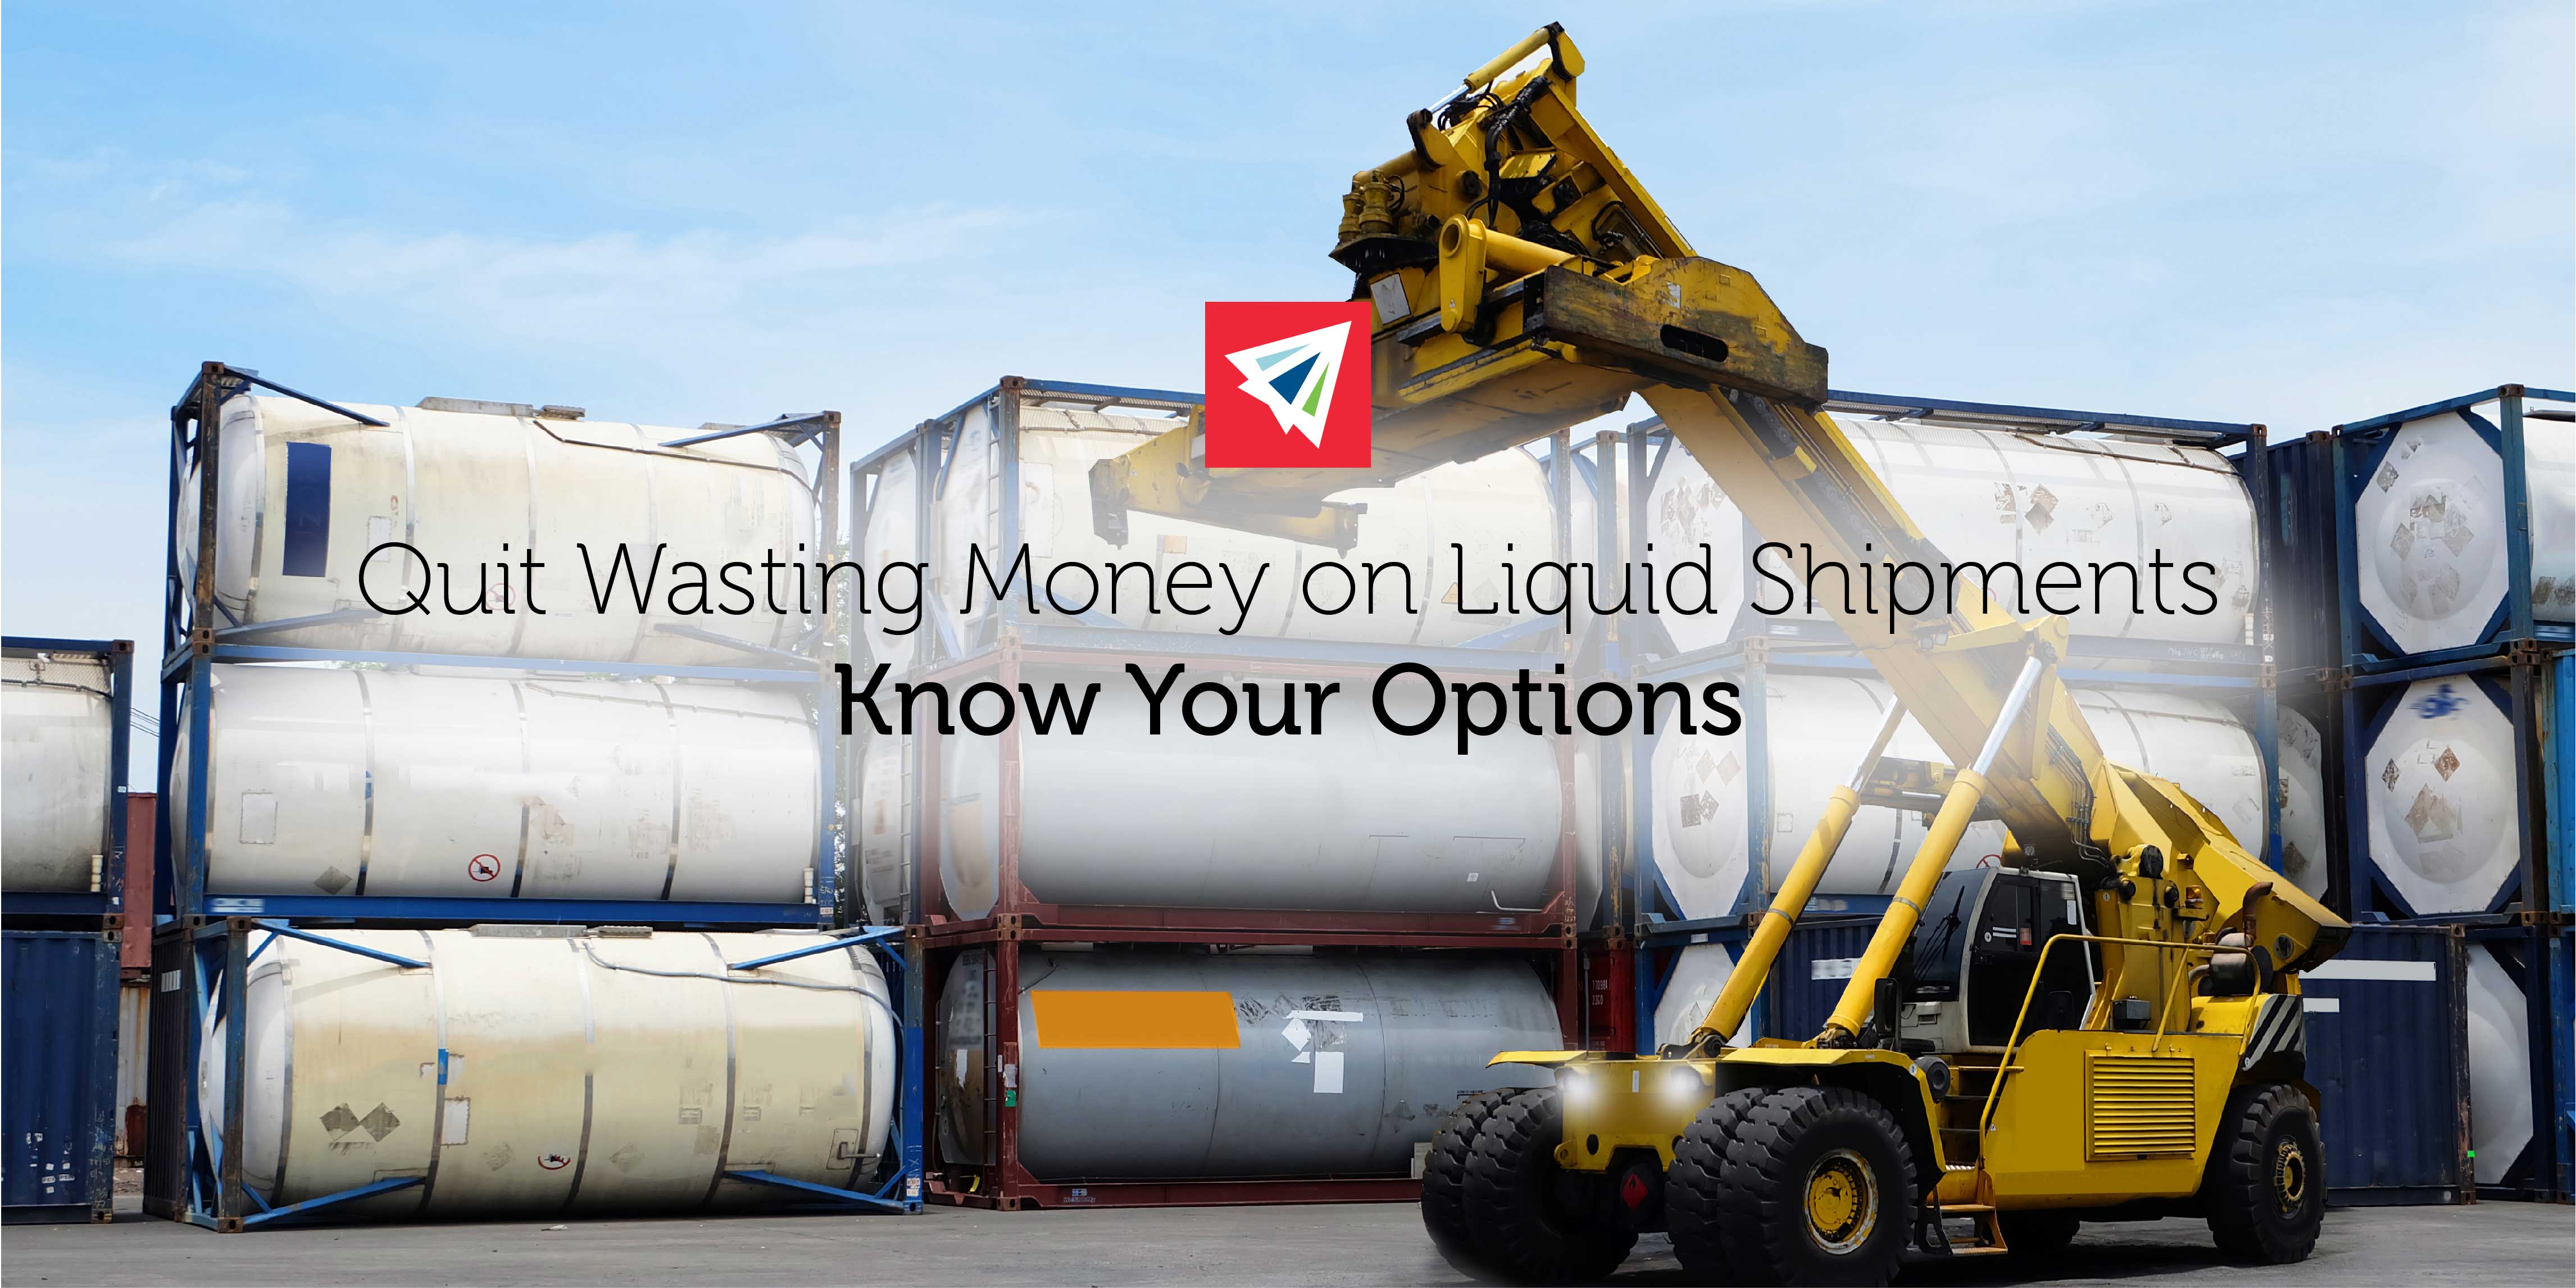 Quit Wasting Money on Liquid Shipments – Know Your Liquid Shipping Options